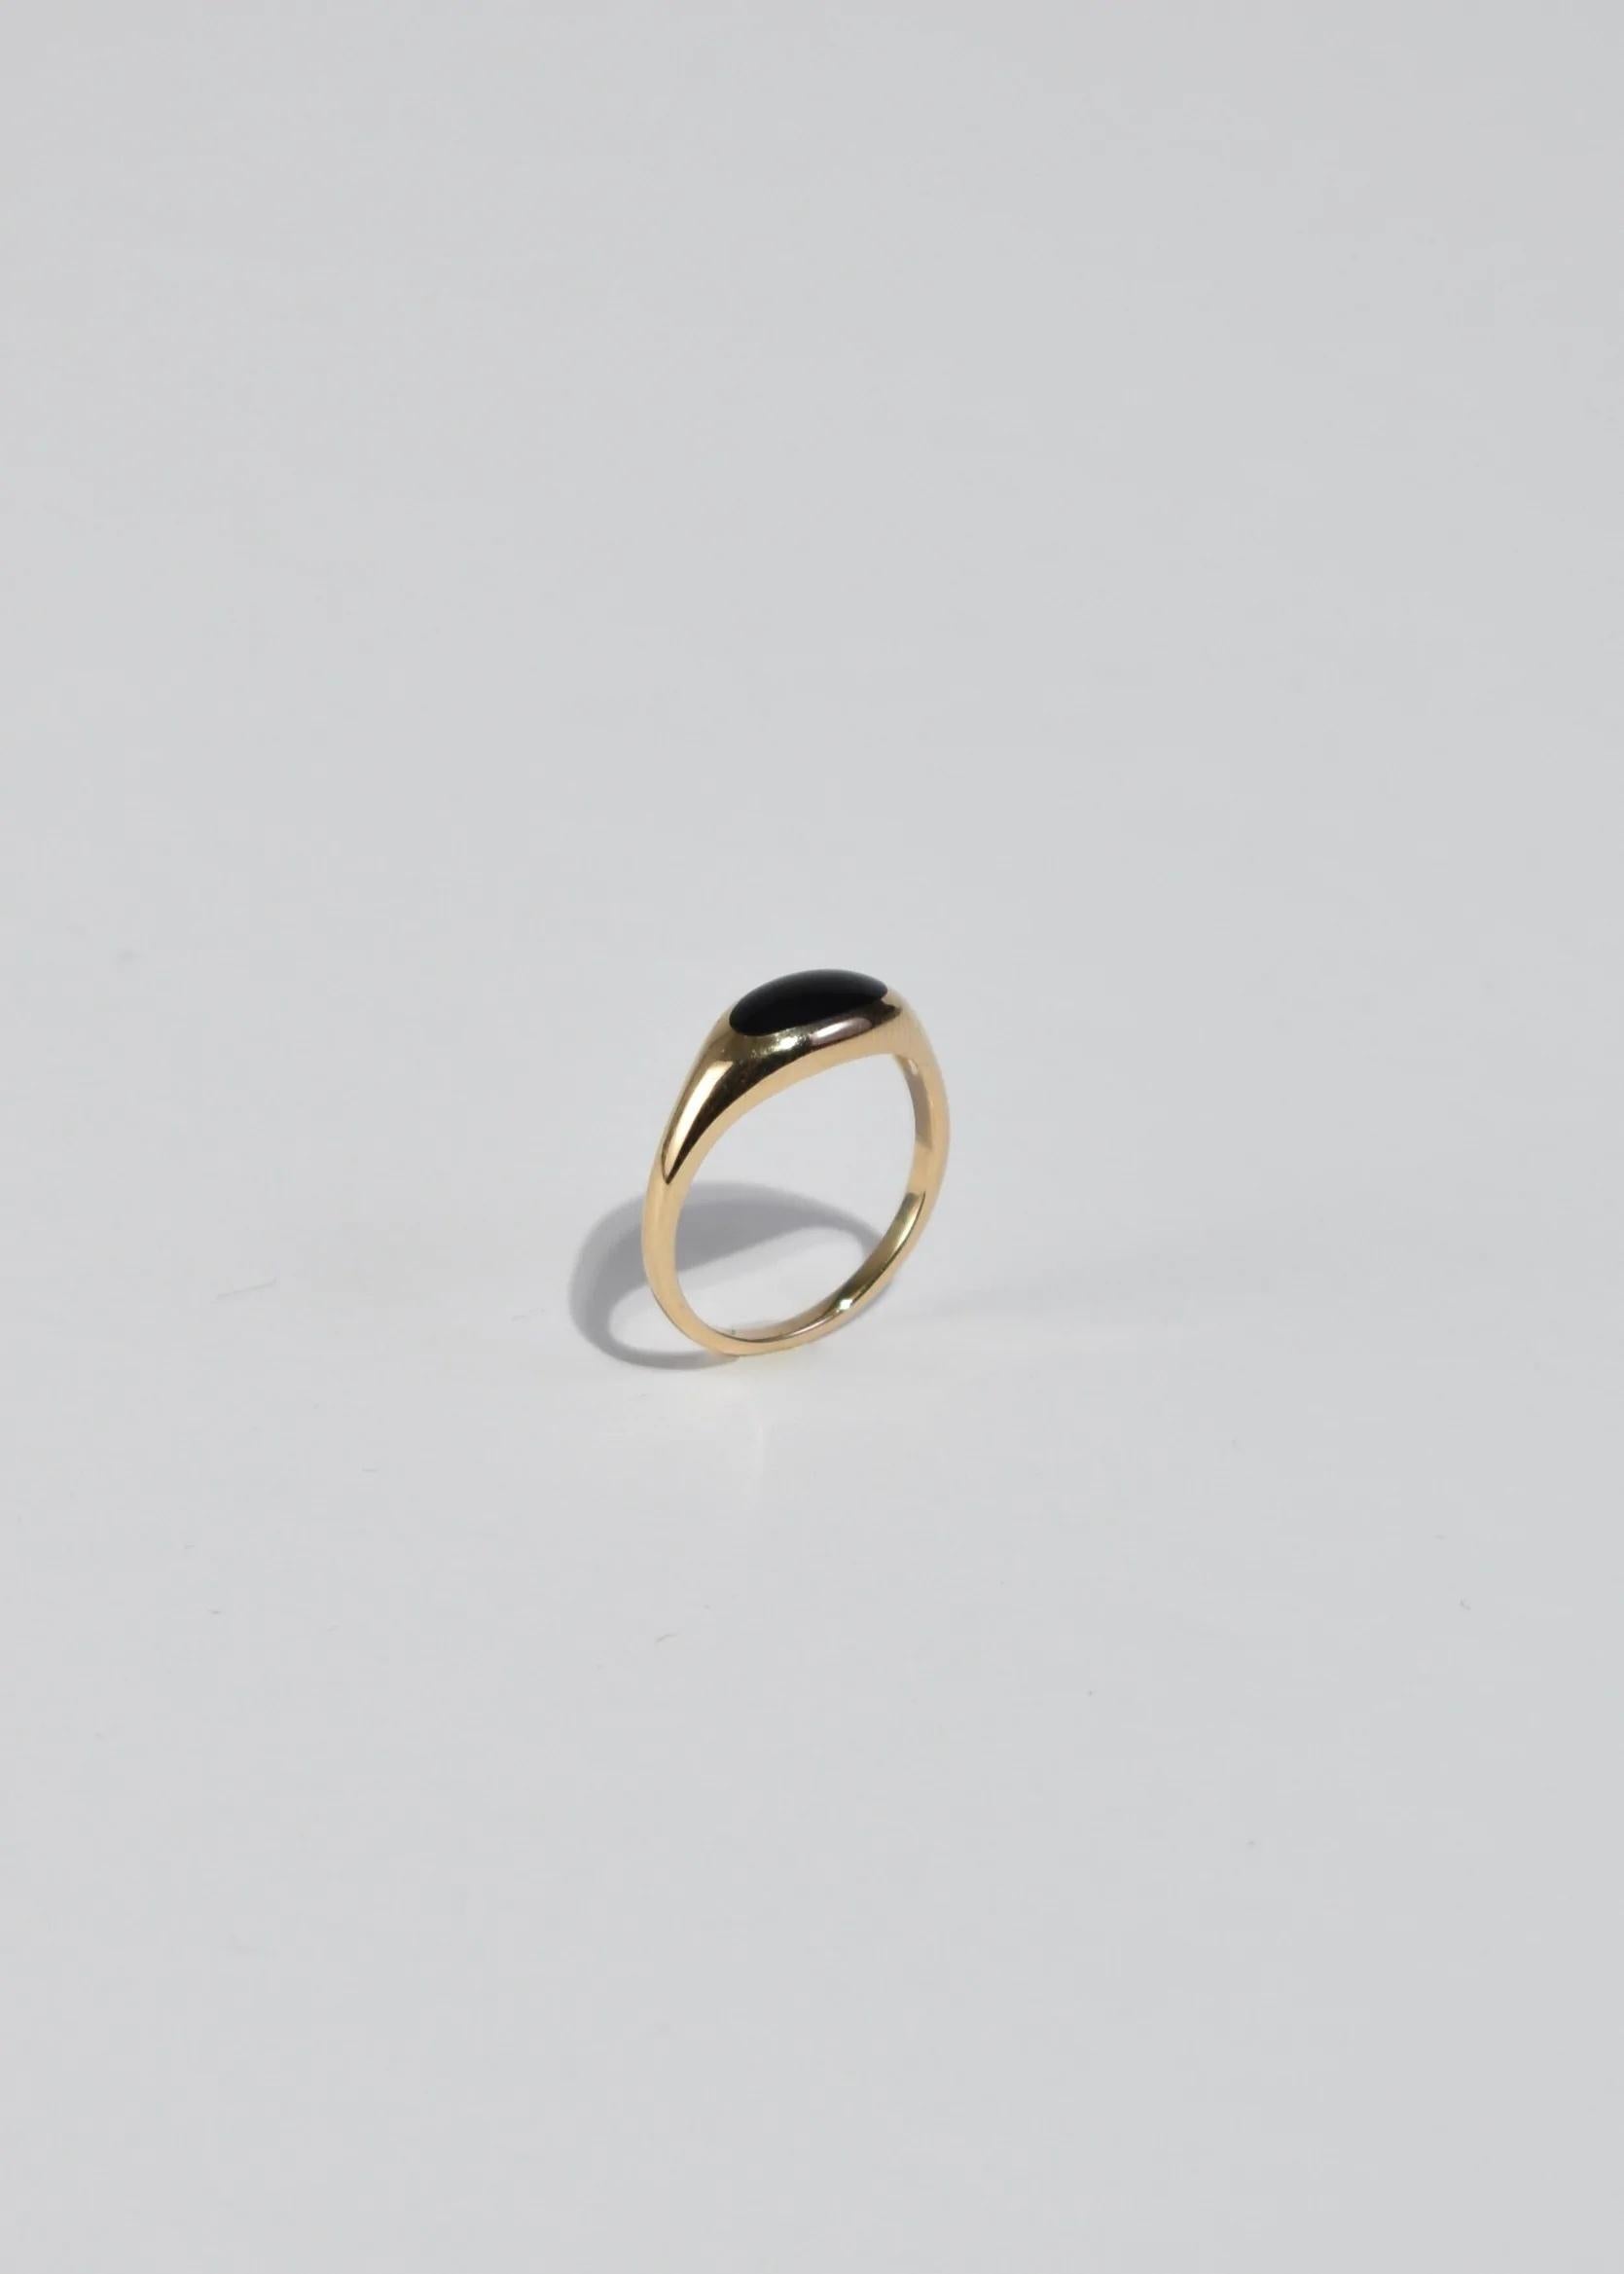 Stunning vintage gold ring with polished oval onyx stone. Stamped 14k.

Material: 14k gold, onyx.